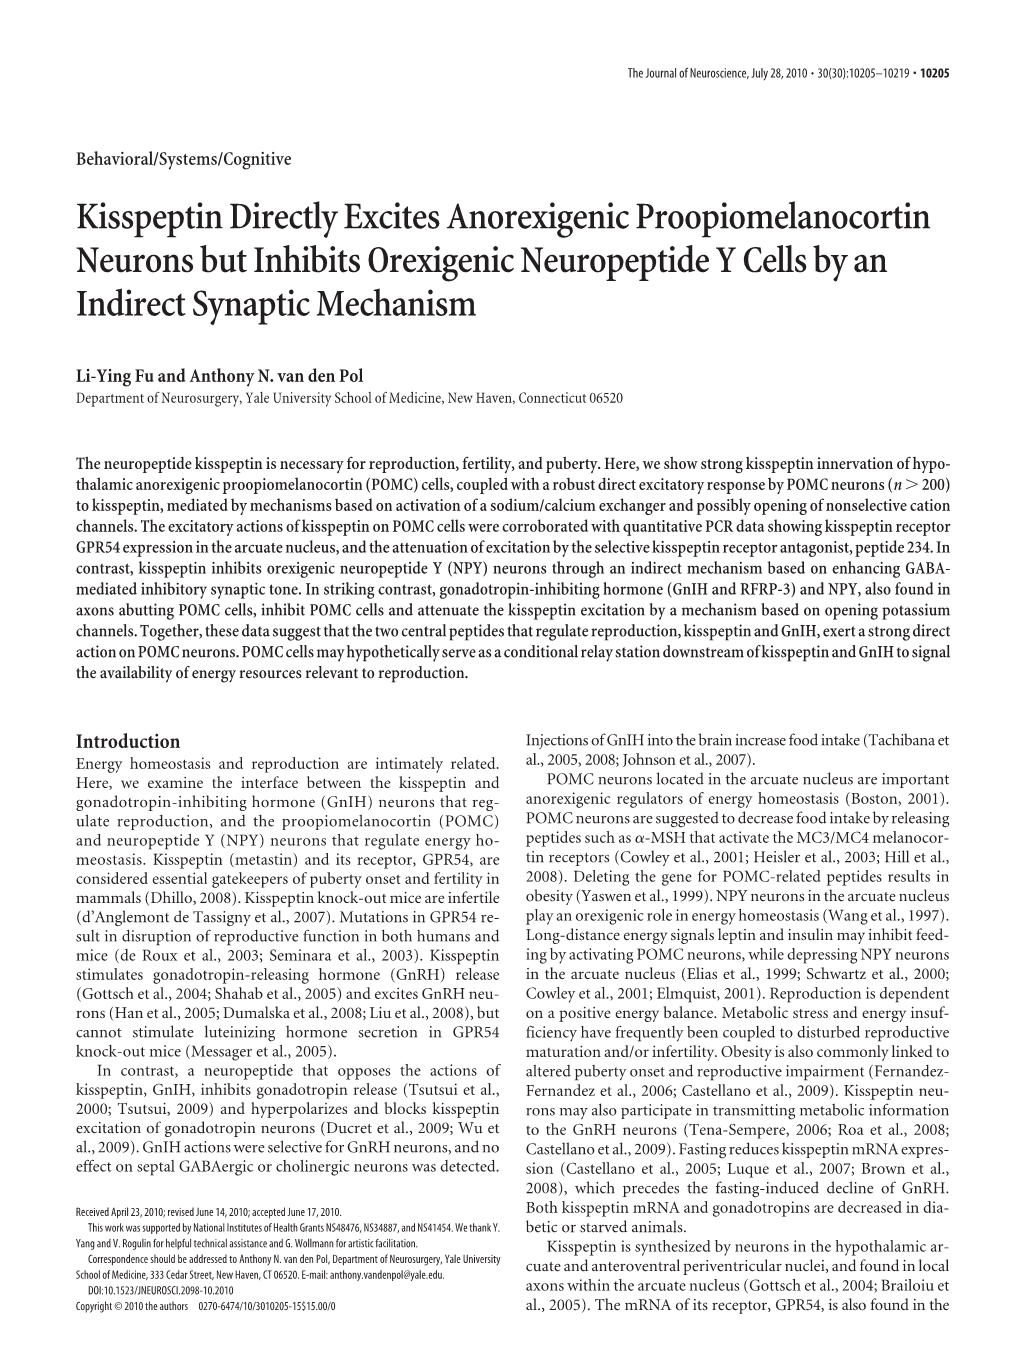 Kisspeptin Directly Excites Anorexigenic Proopiomelanocortin Neurons but Inhibits Orexigenic Neuropeptide Y Cells by an Indirect Synaptic Mechanism